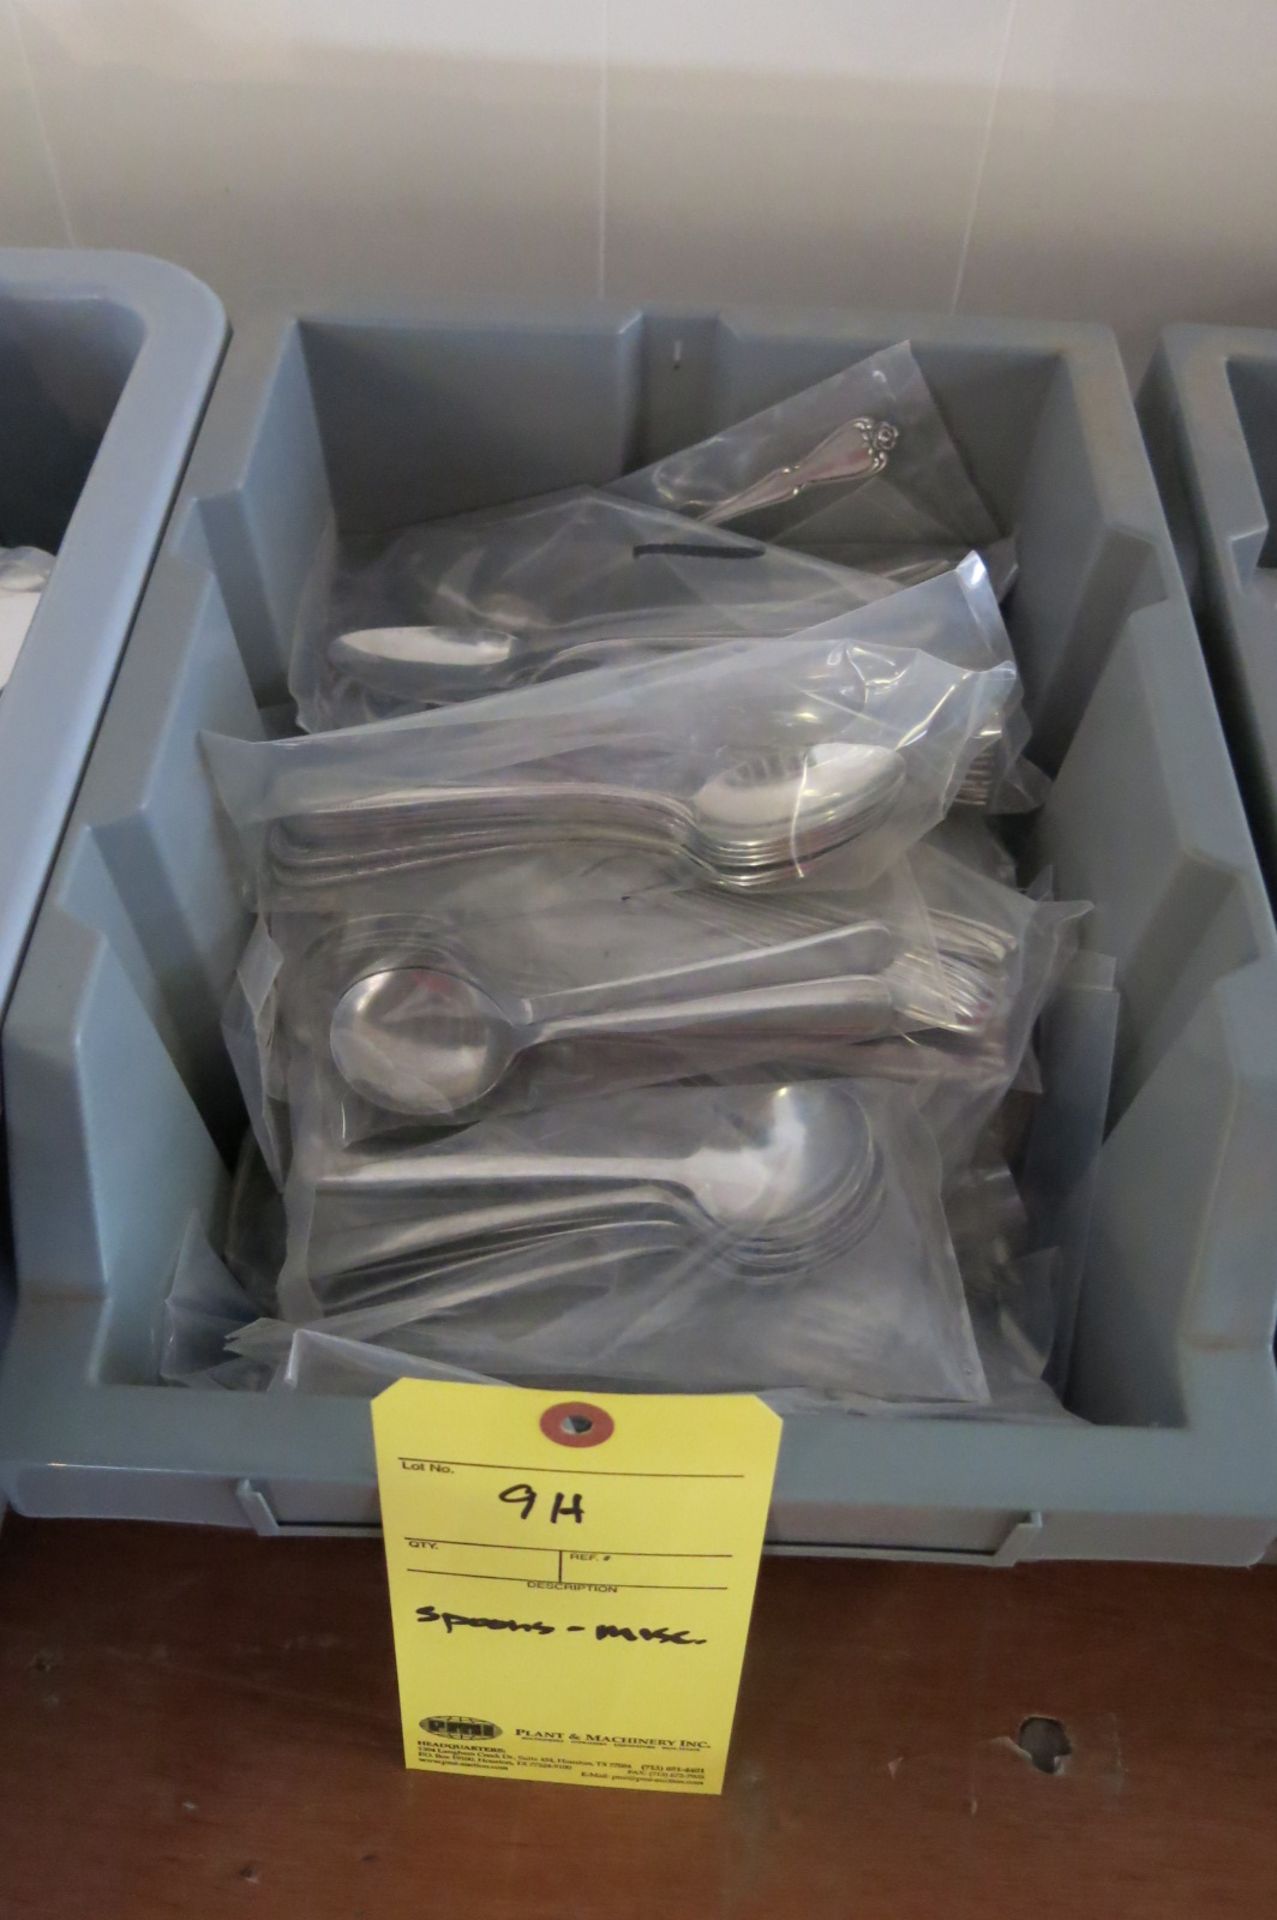 LOT OF SPOONS, misc.